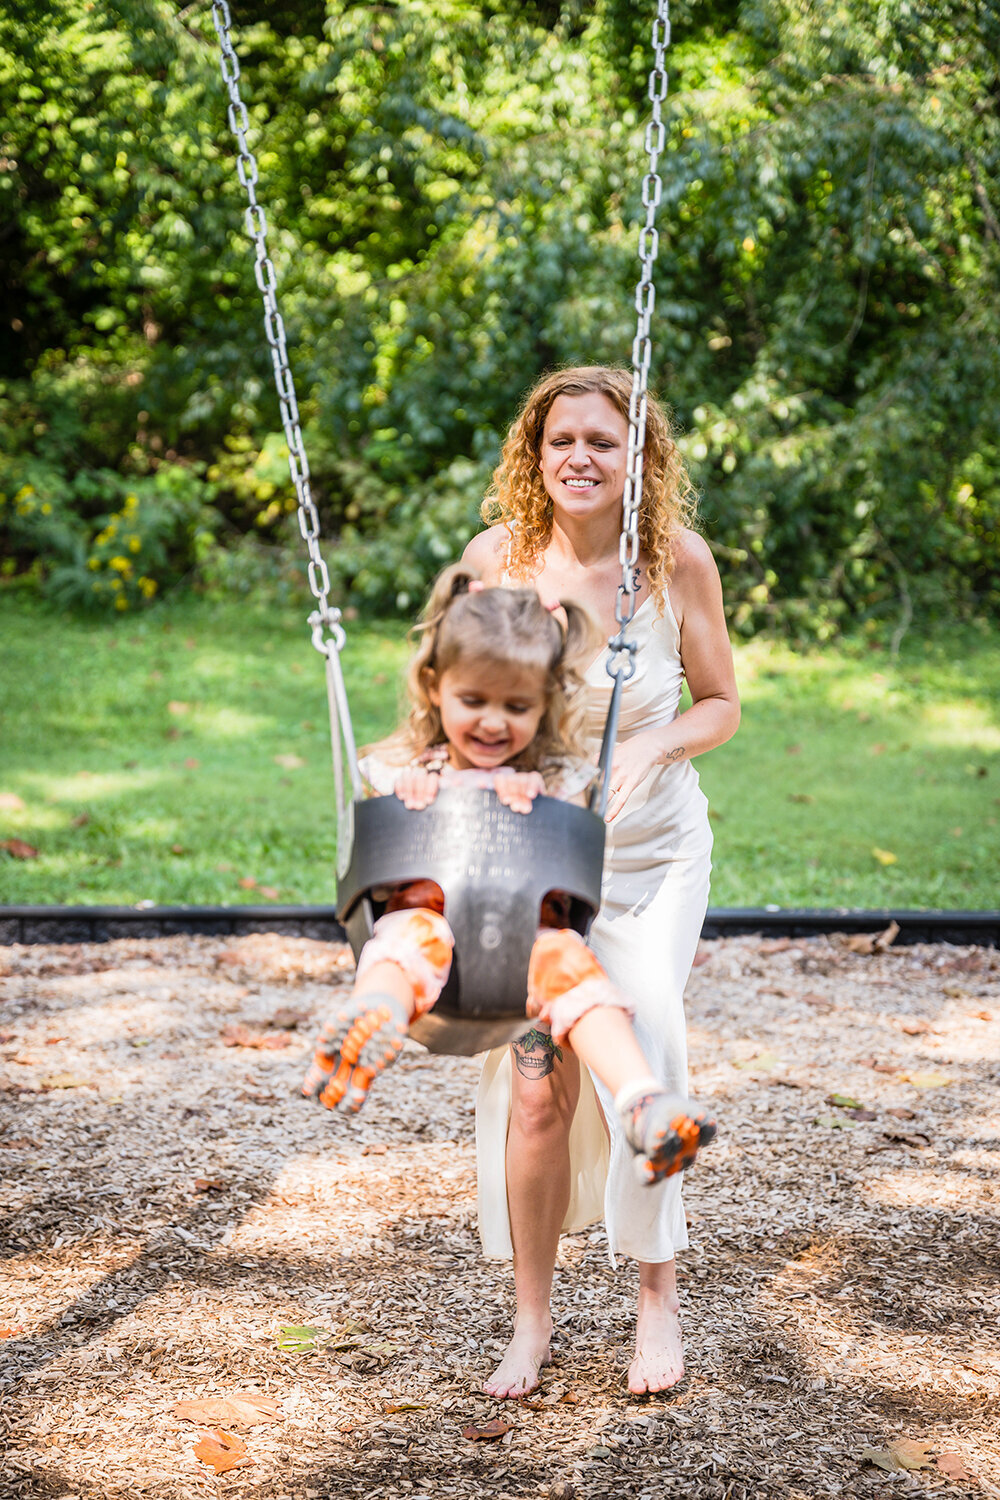 A parent pushes her child in a swing at the playground at Fishburn Park and smiles as her toddler giggles.